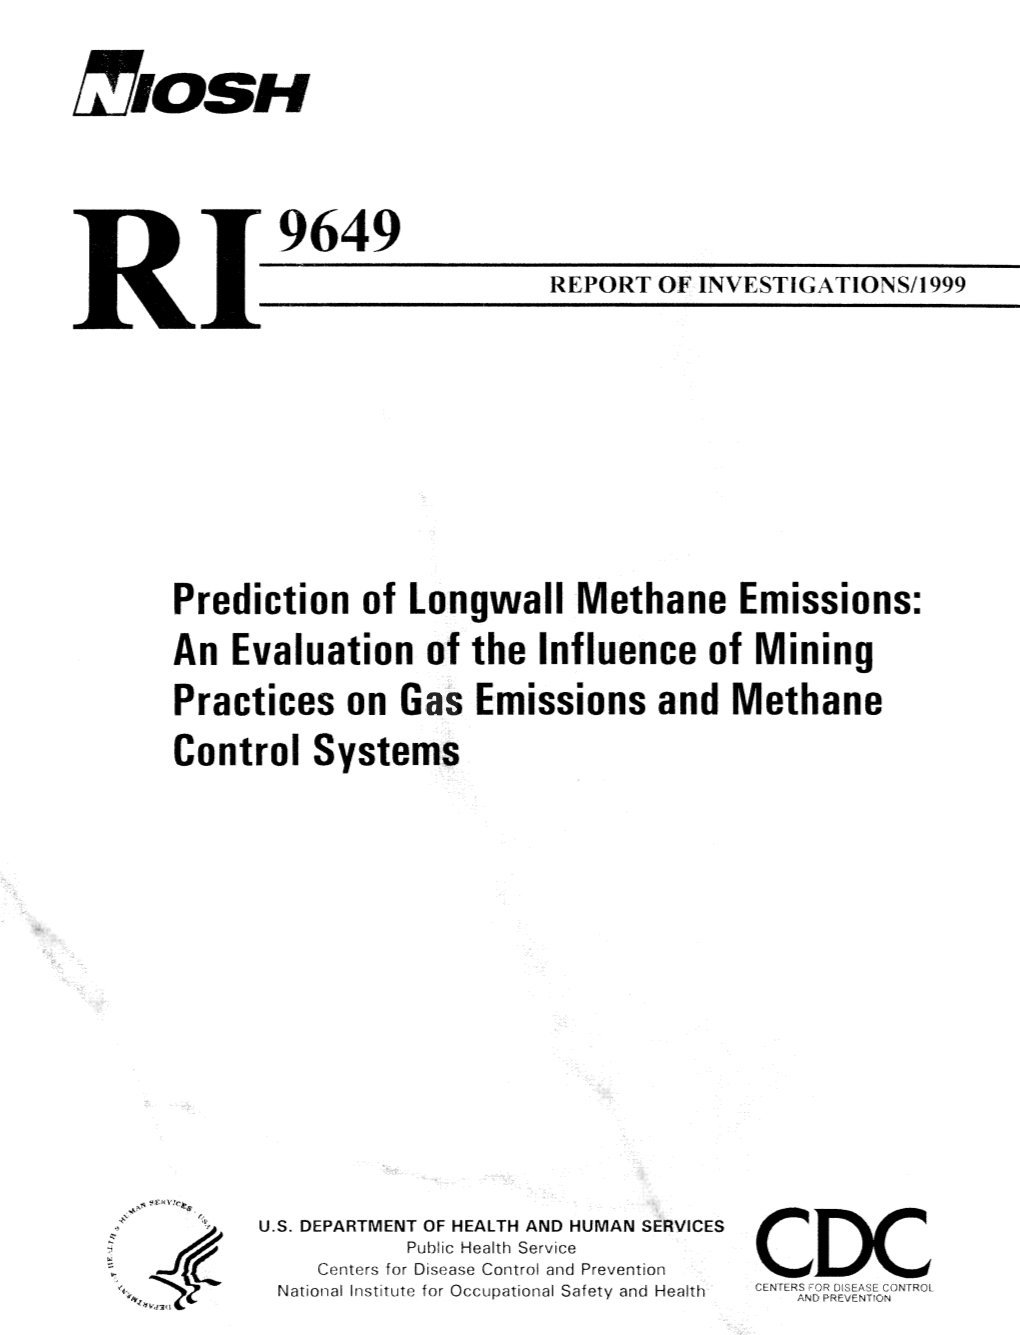 Prediction of Longwall Methane Emissions: an Evaluation of the Influence of Mining Practices on Missions and Methane Control Syst